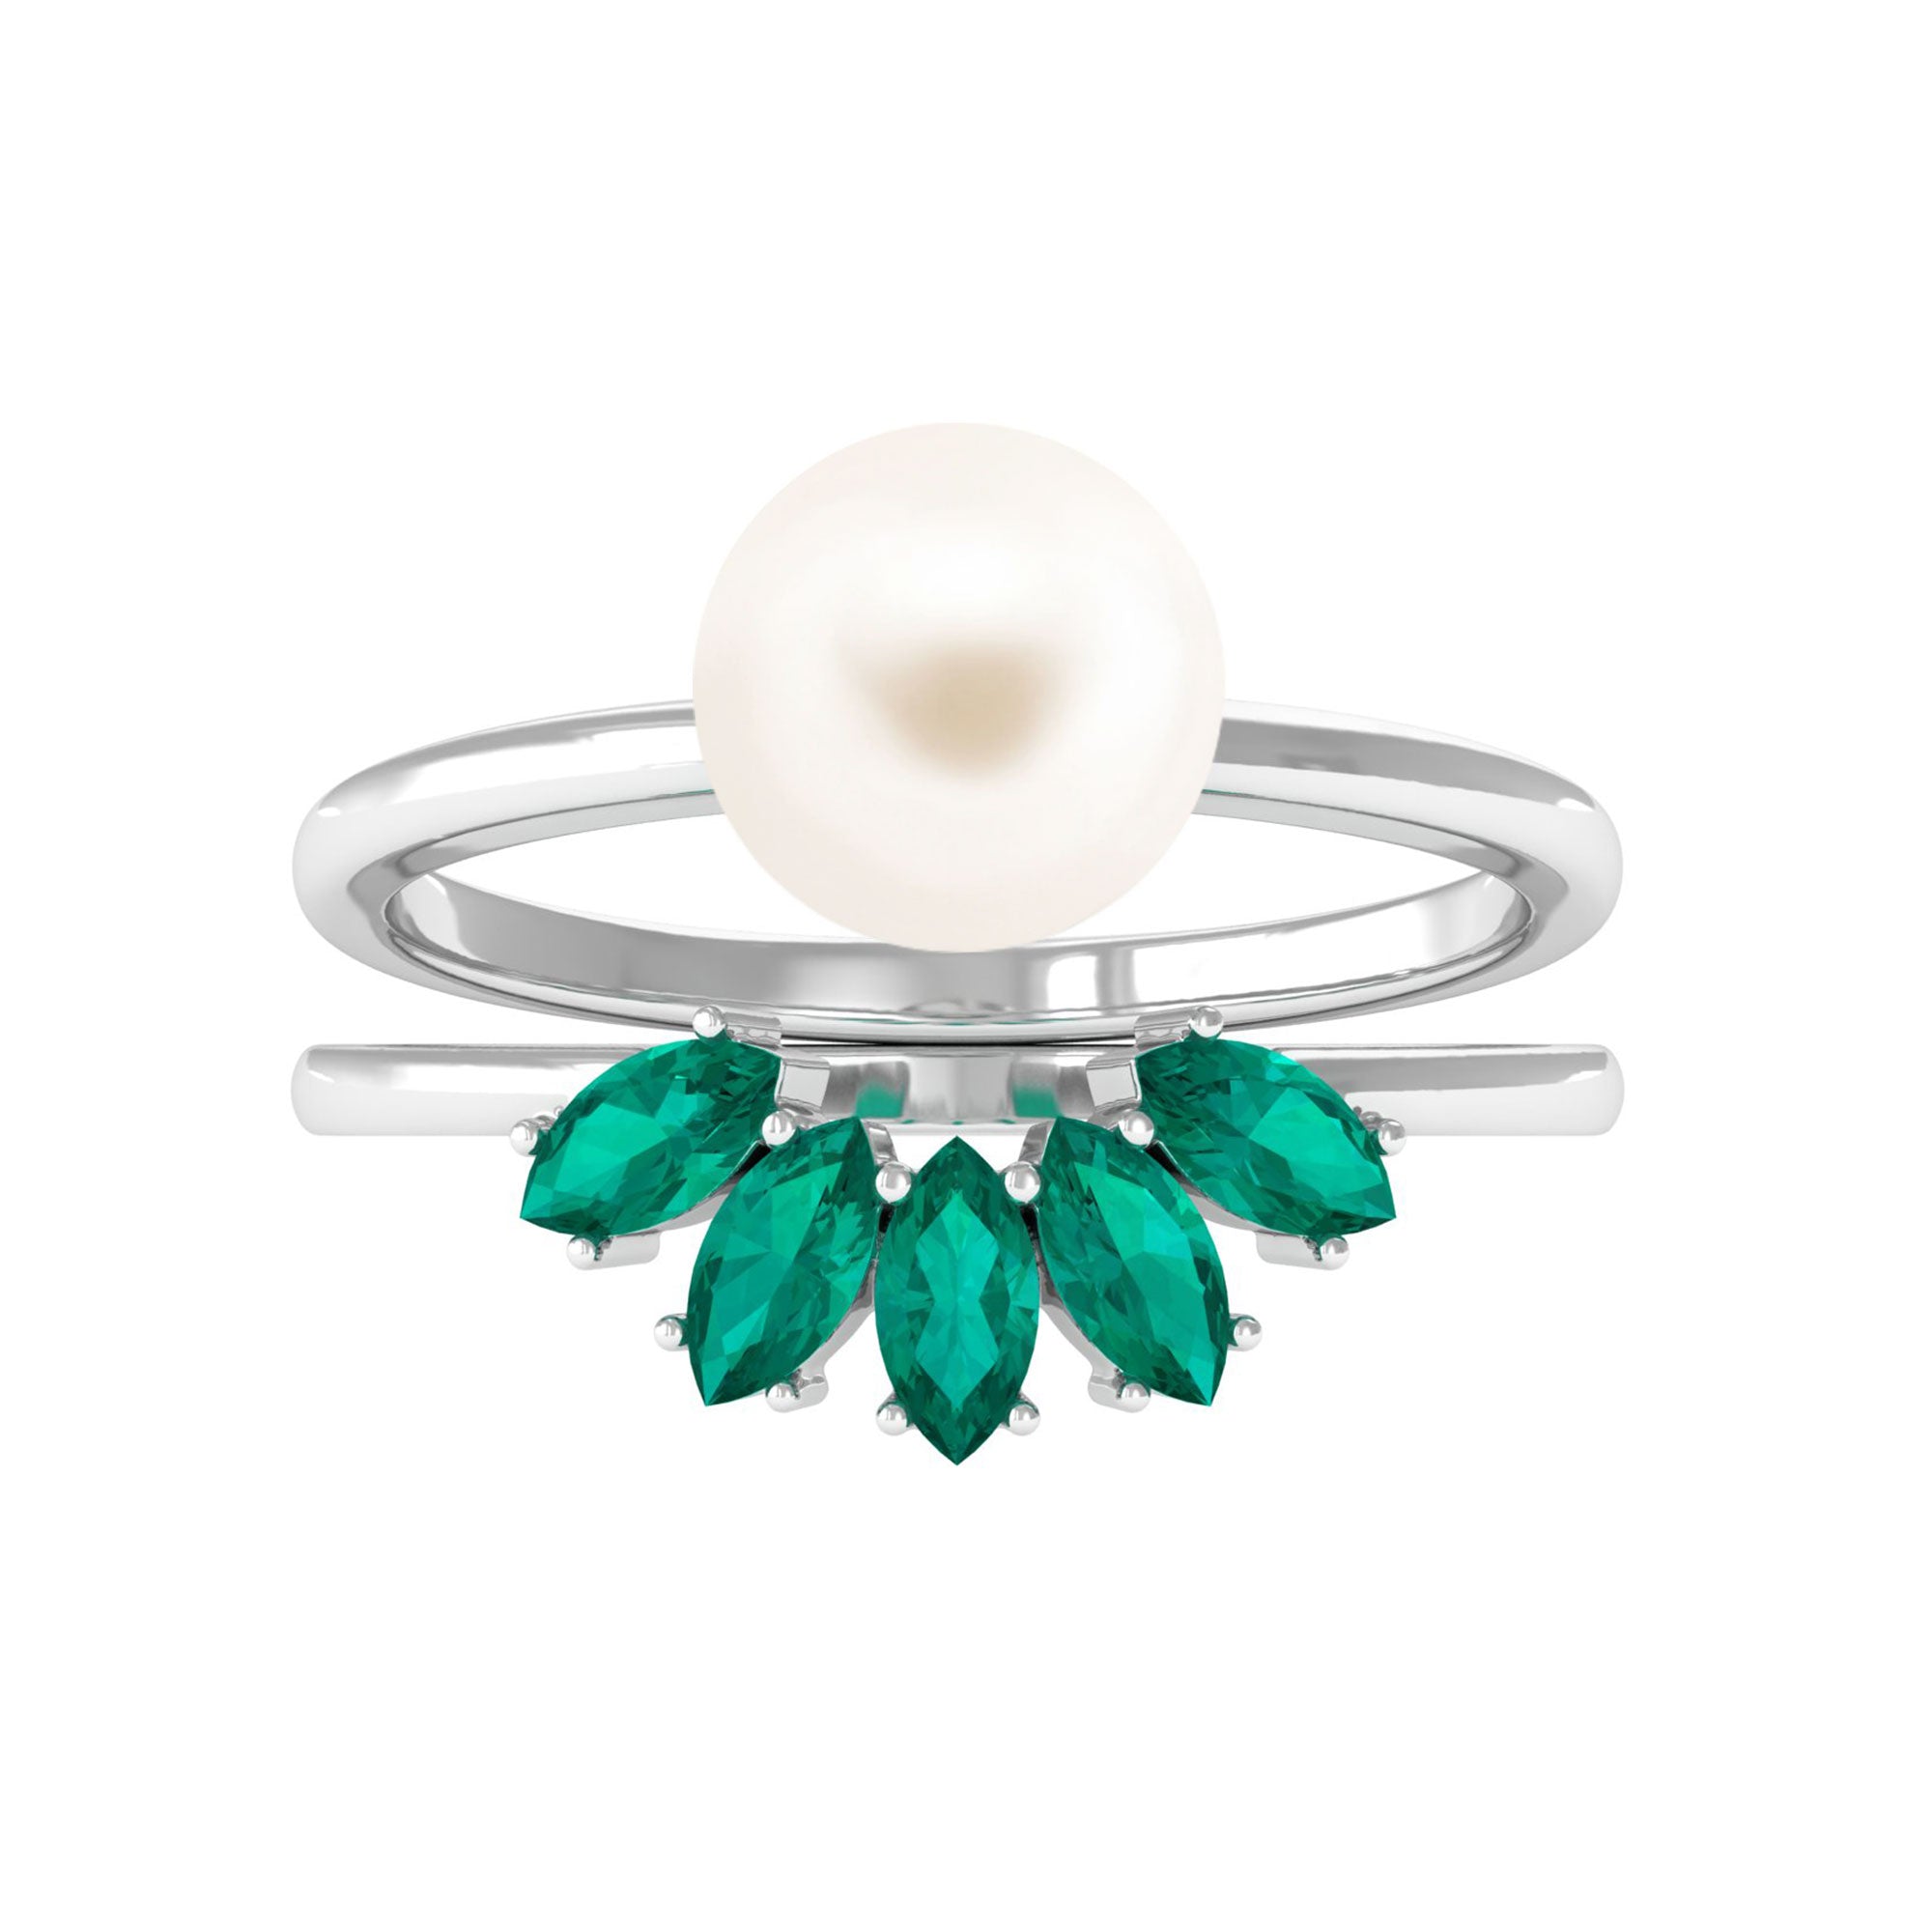 Arisha Jewels-White Pearl Solitaire Ring Set with Emerald